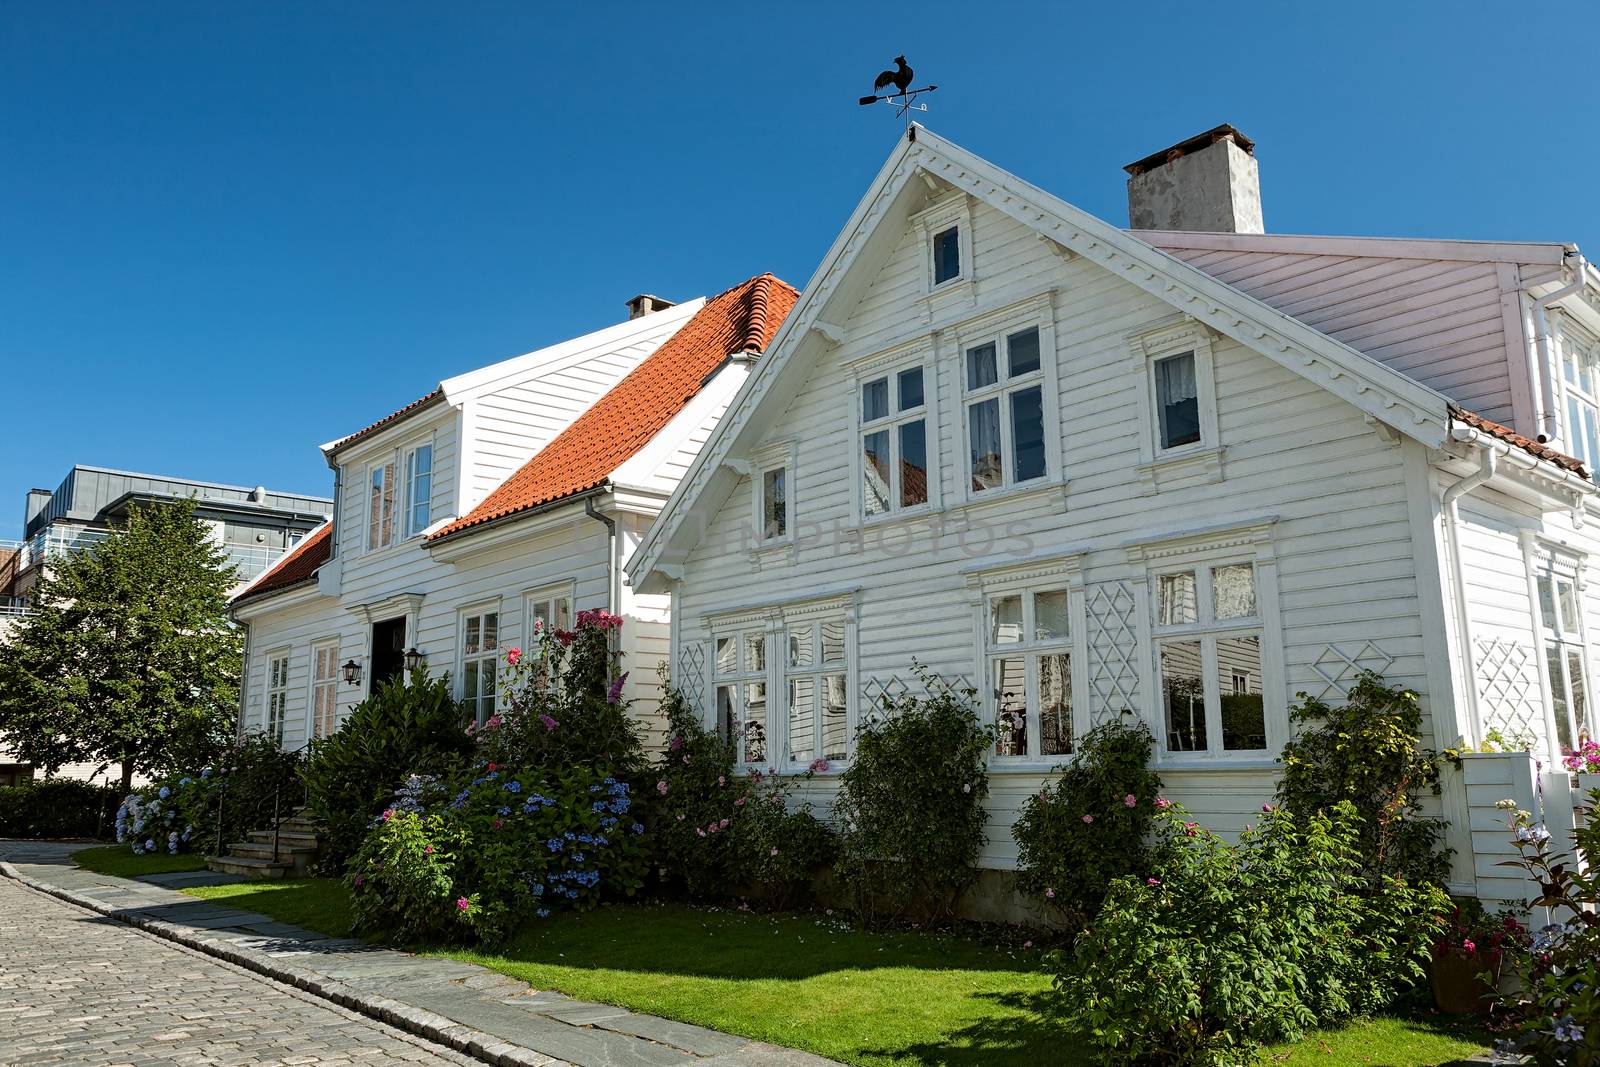 Typical houses in Stavanger, Norway by LuigiMorbidelli